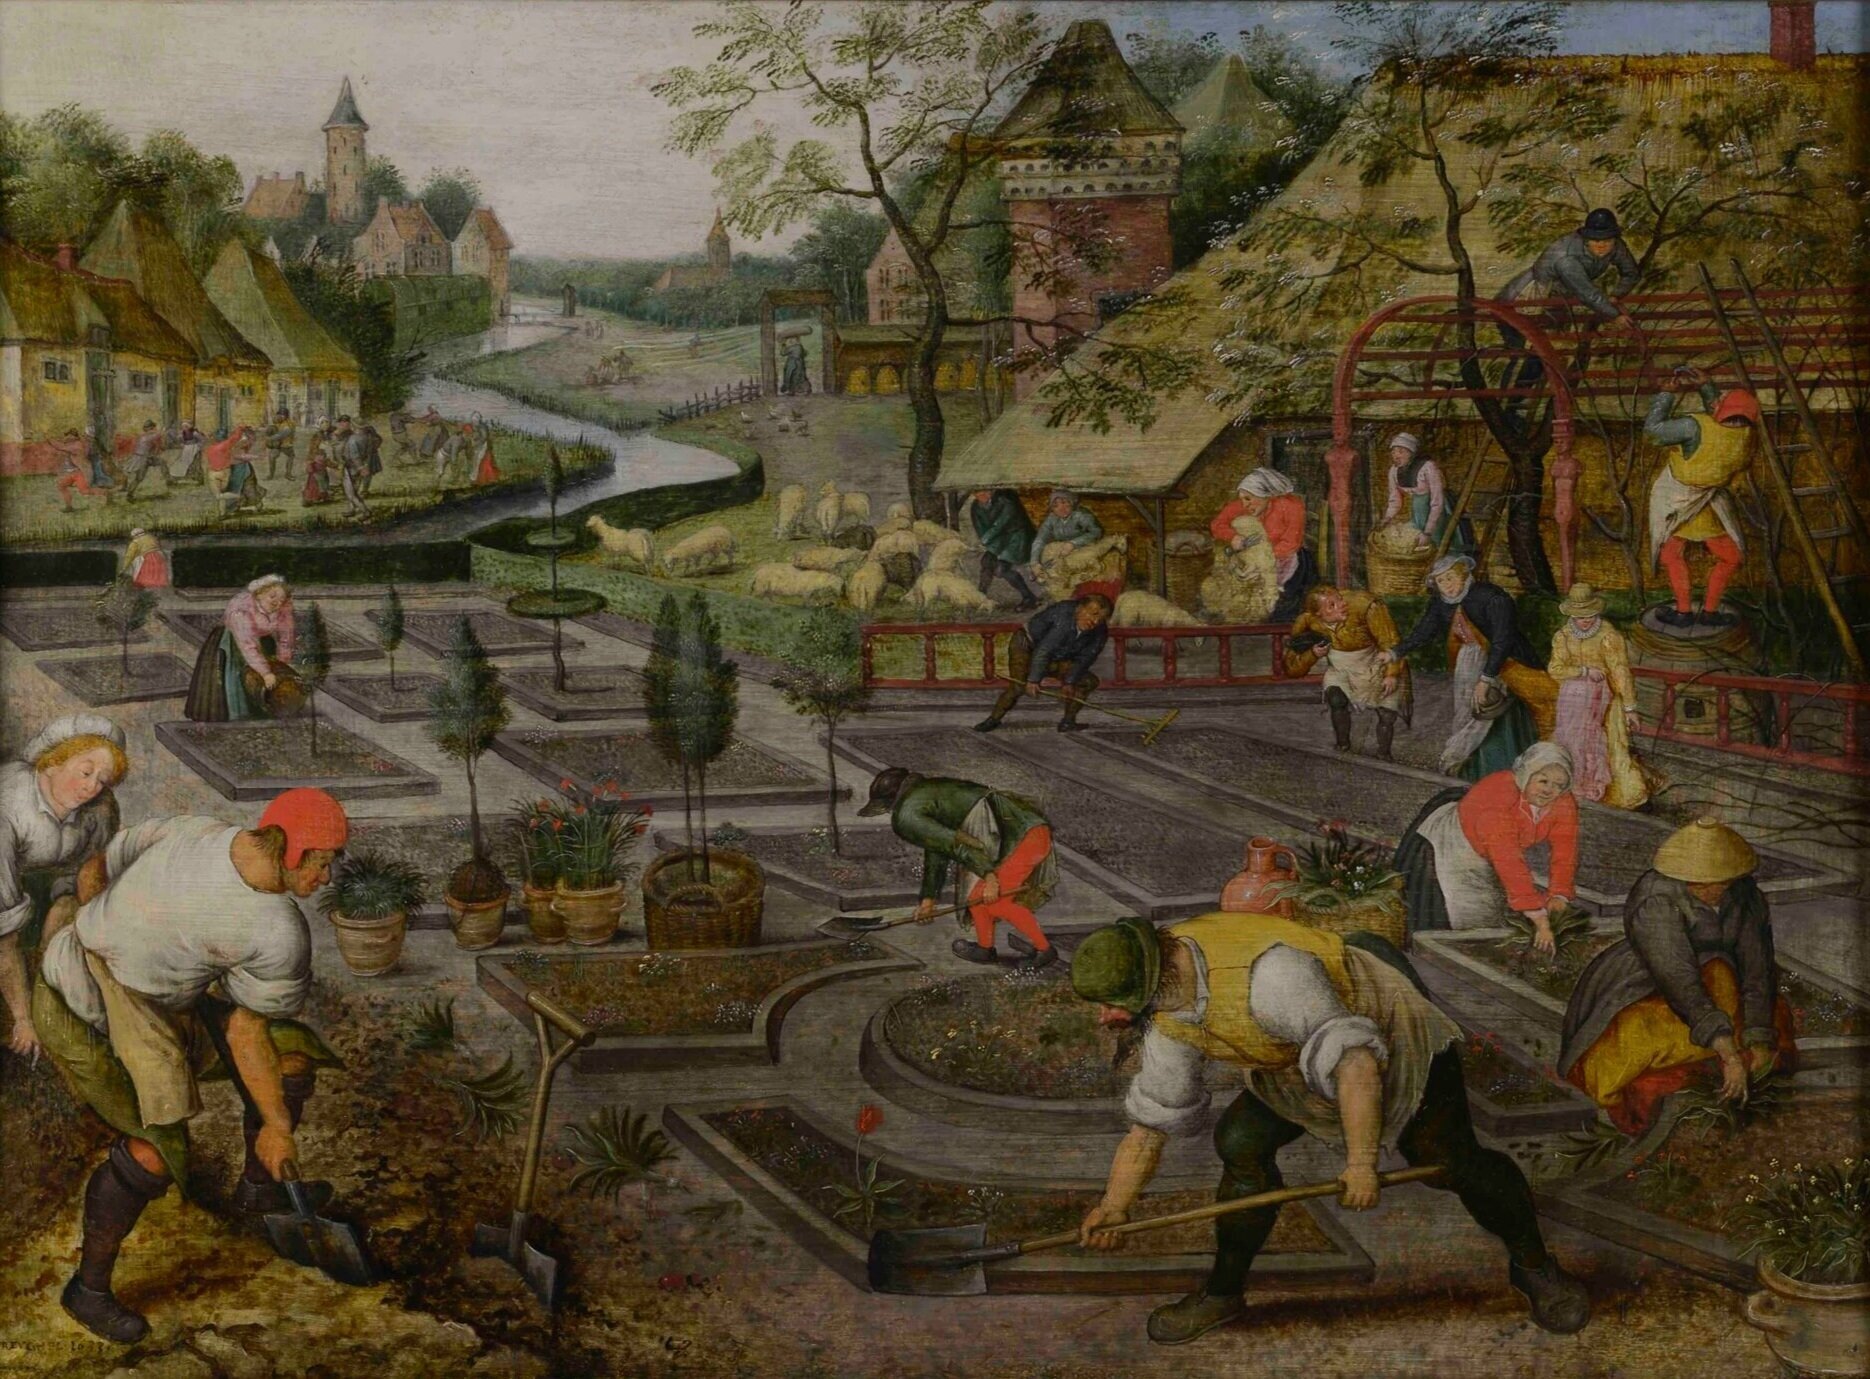 Episode 3 - ‘Spring’ by Peter Brueghel the Younger